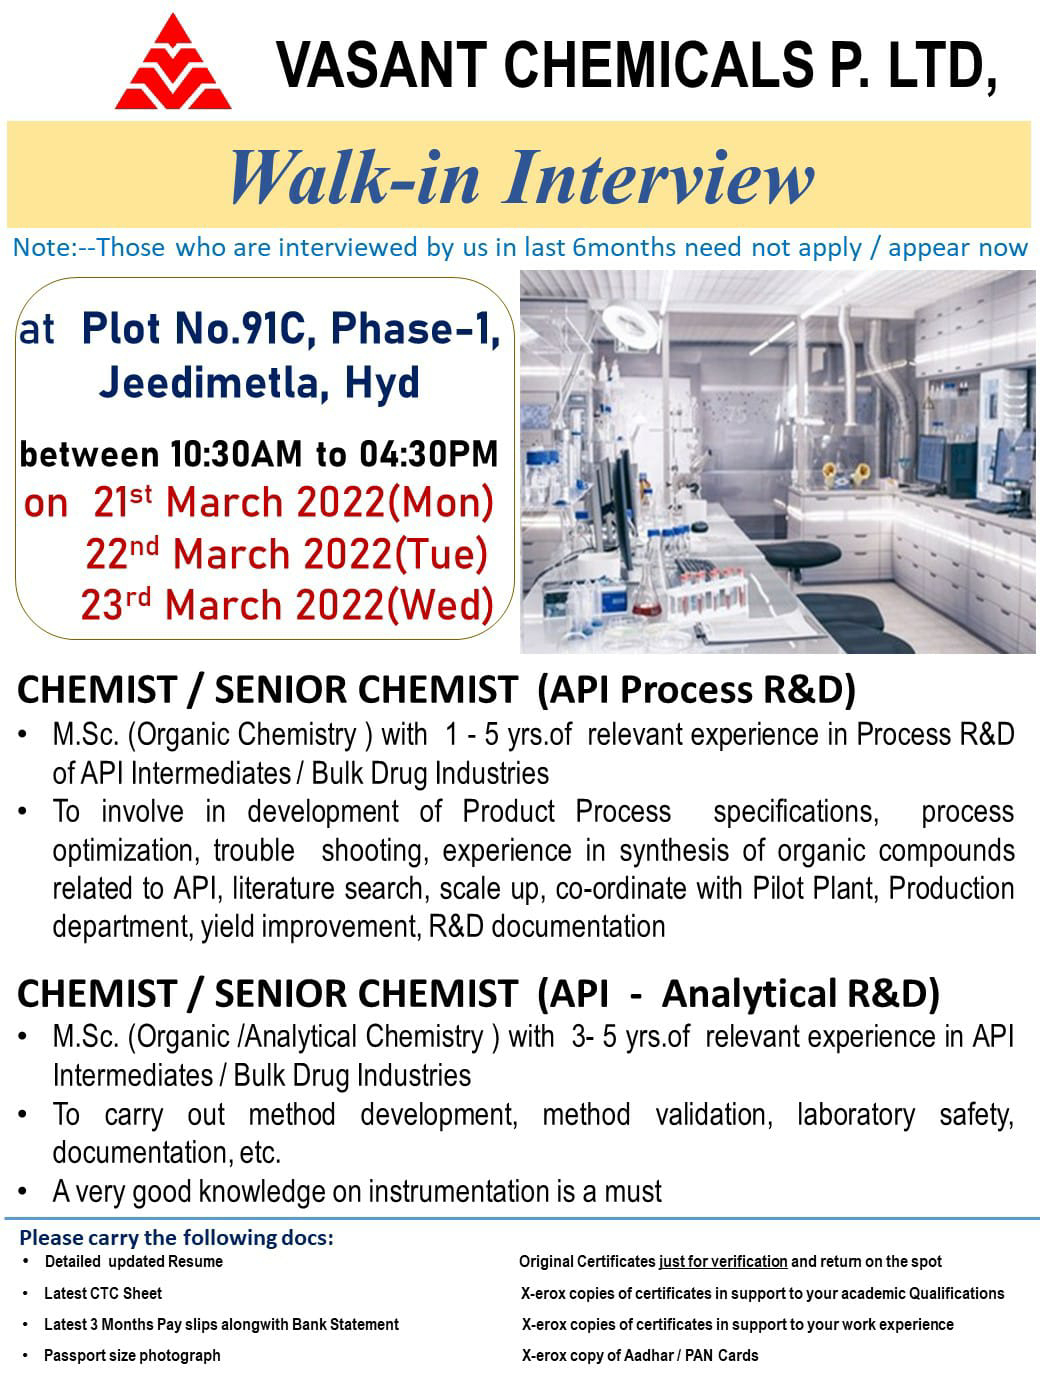 Job Availables,Vasant Chemicals Pvt Ltd Walk-In-Interview For MDc Organic Chemistry/ Analytical Chemistry